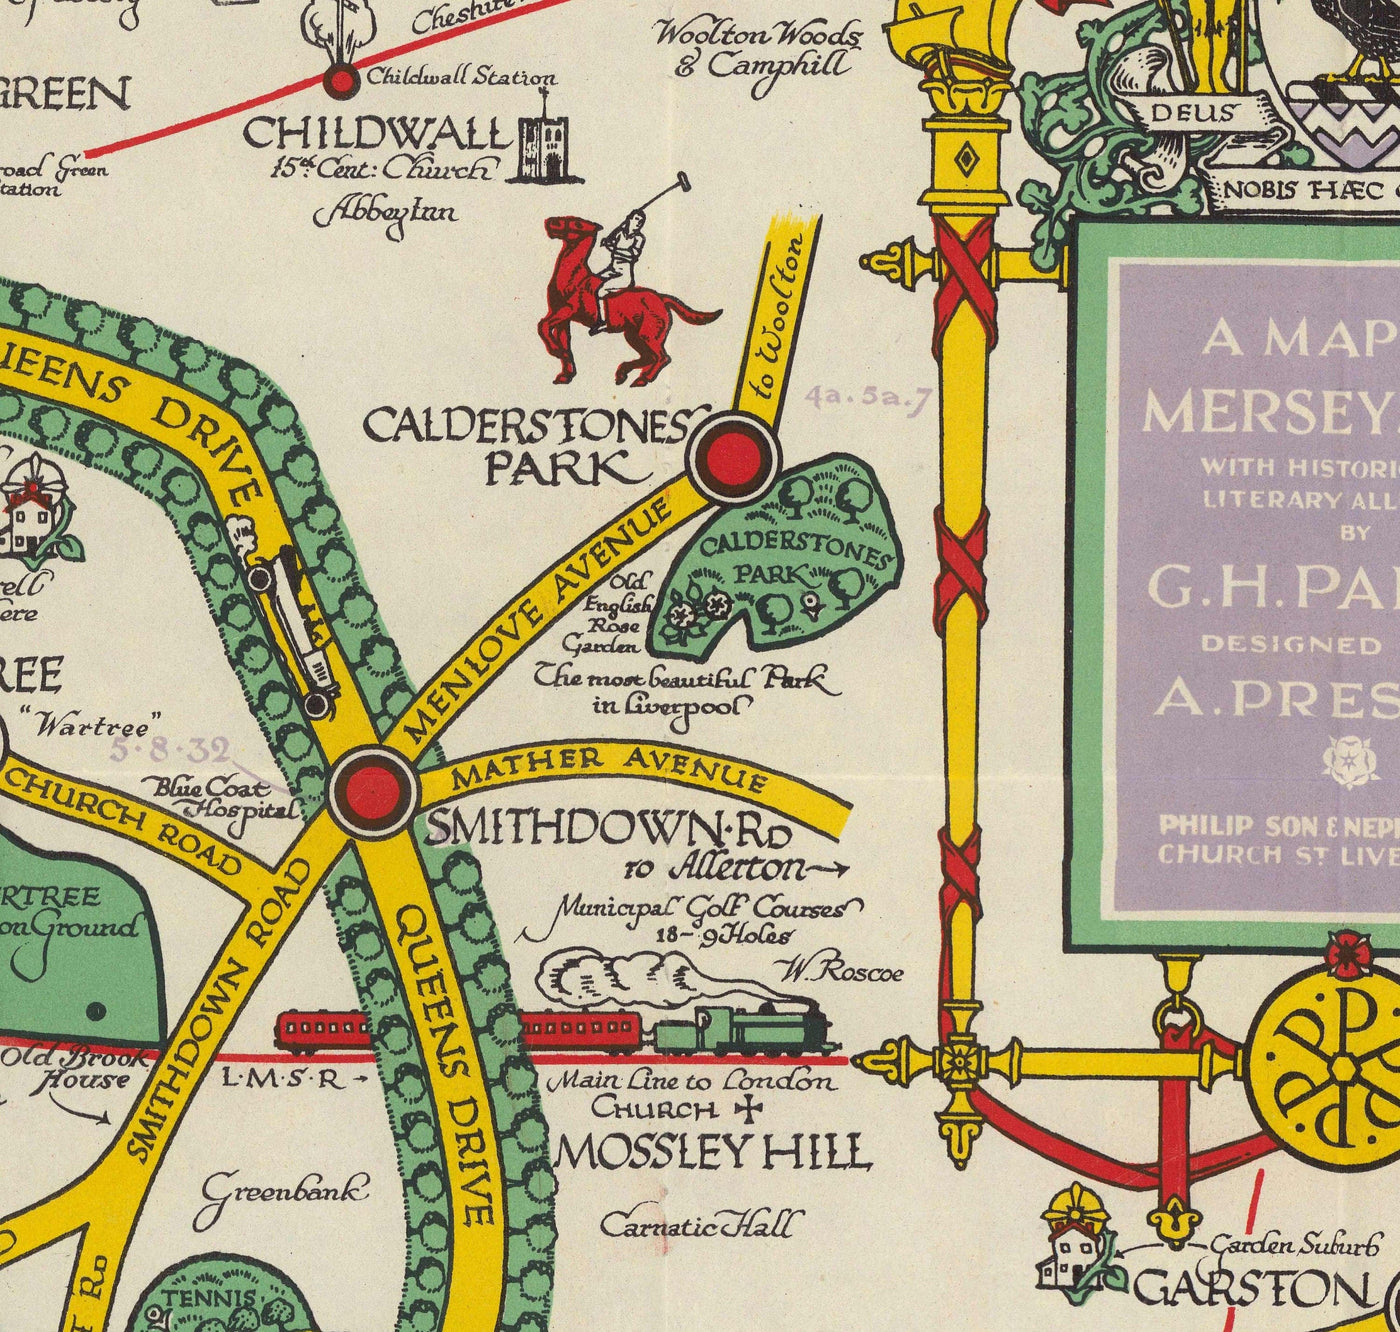 Old Map of Liverpool, 1934 by GH Parry - Pictorial City Chart - Mersey, Docks, Parks, Old Buildings